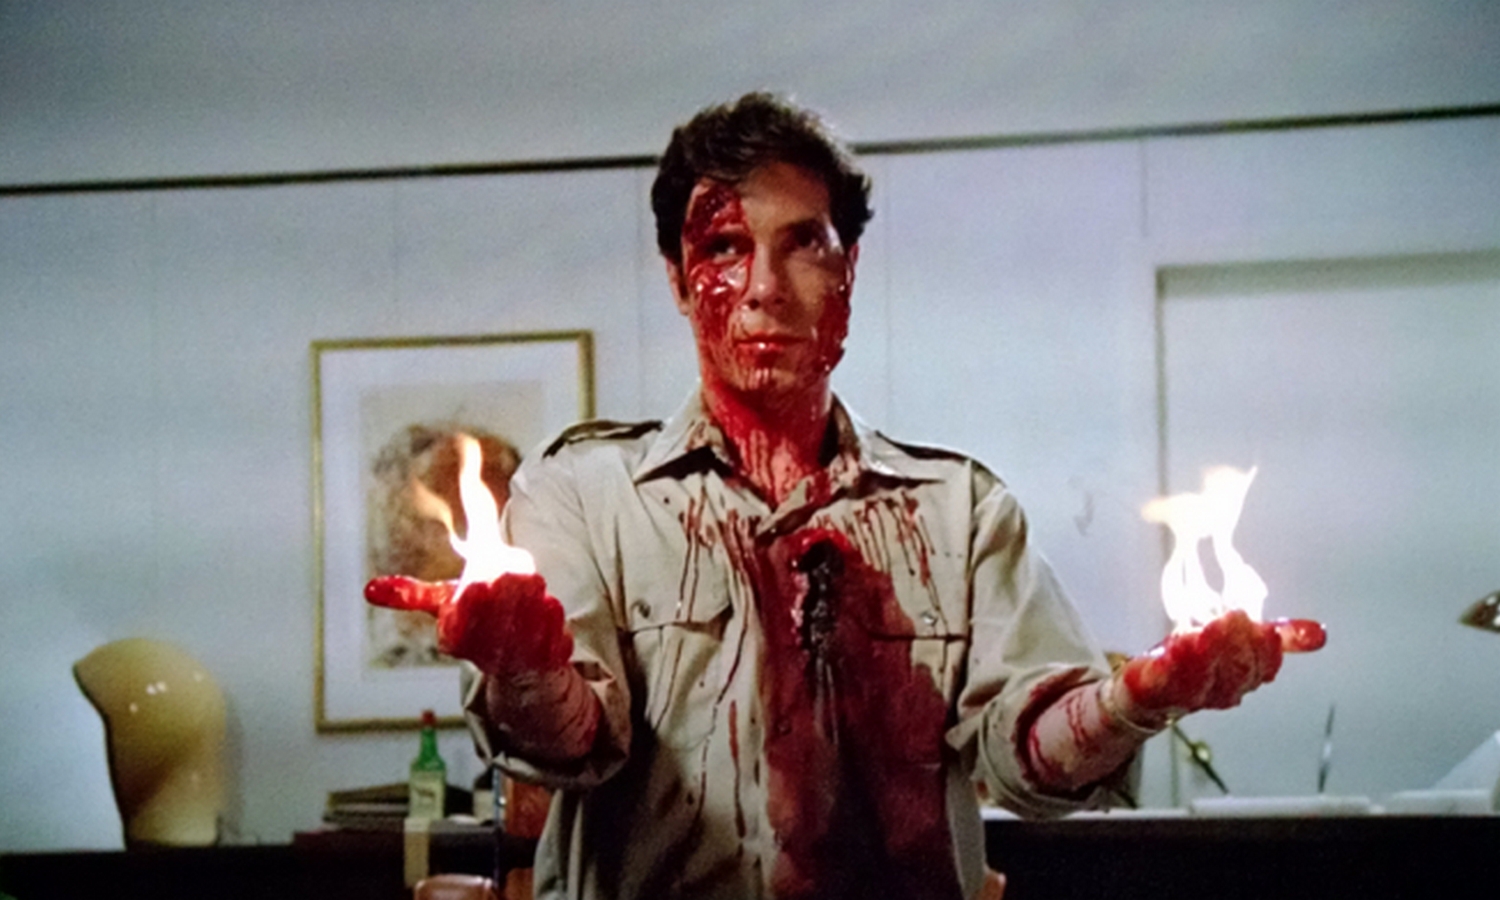 Scanners' Series in Development at HBO, David Cronenberg Producing